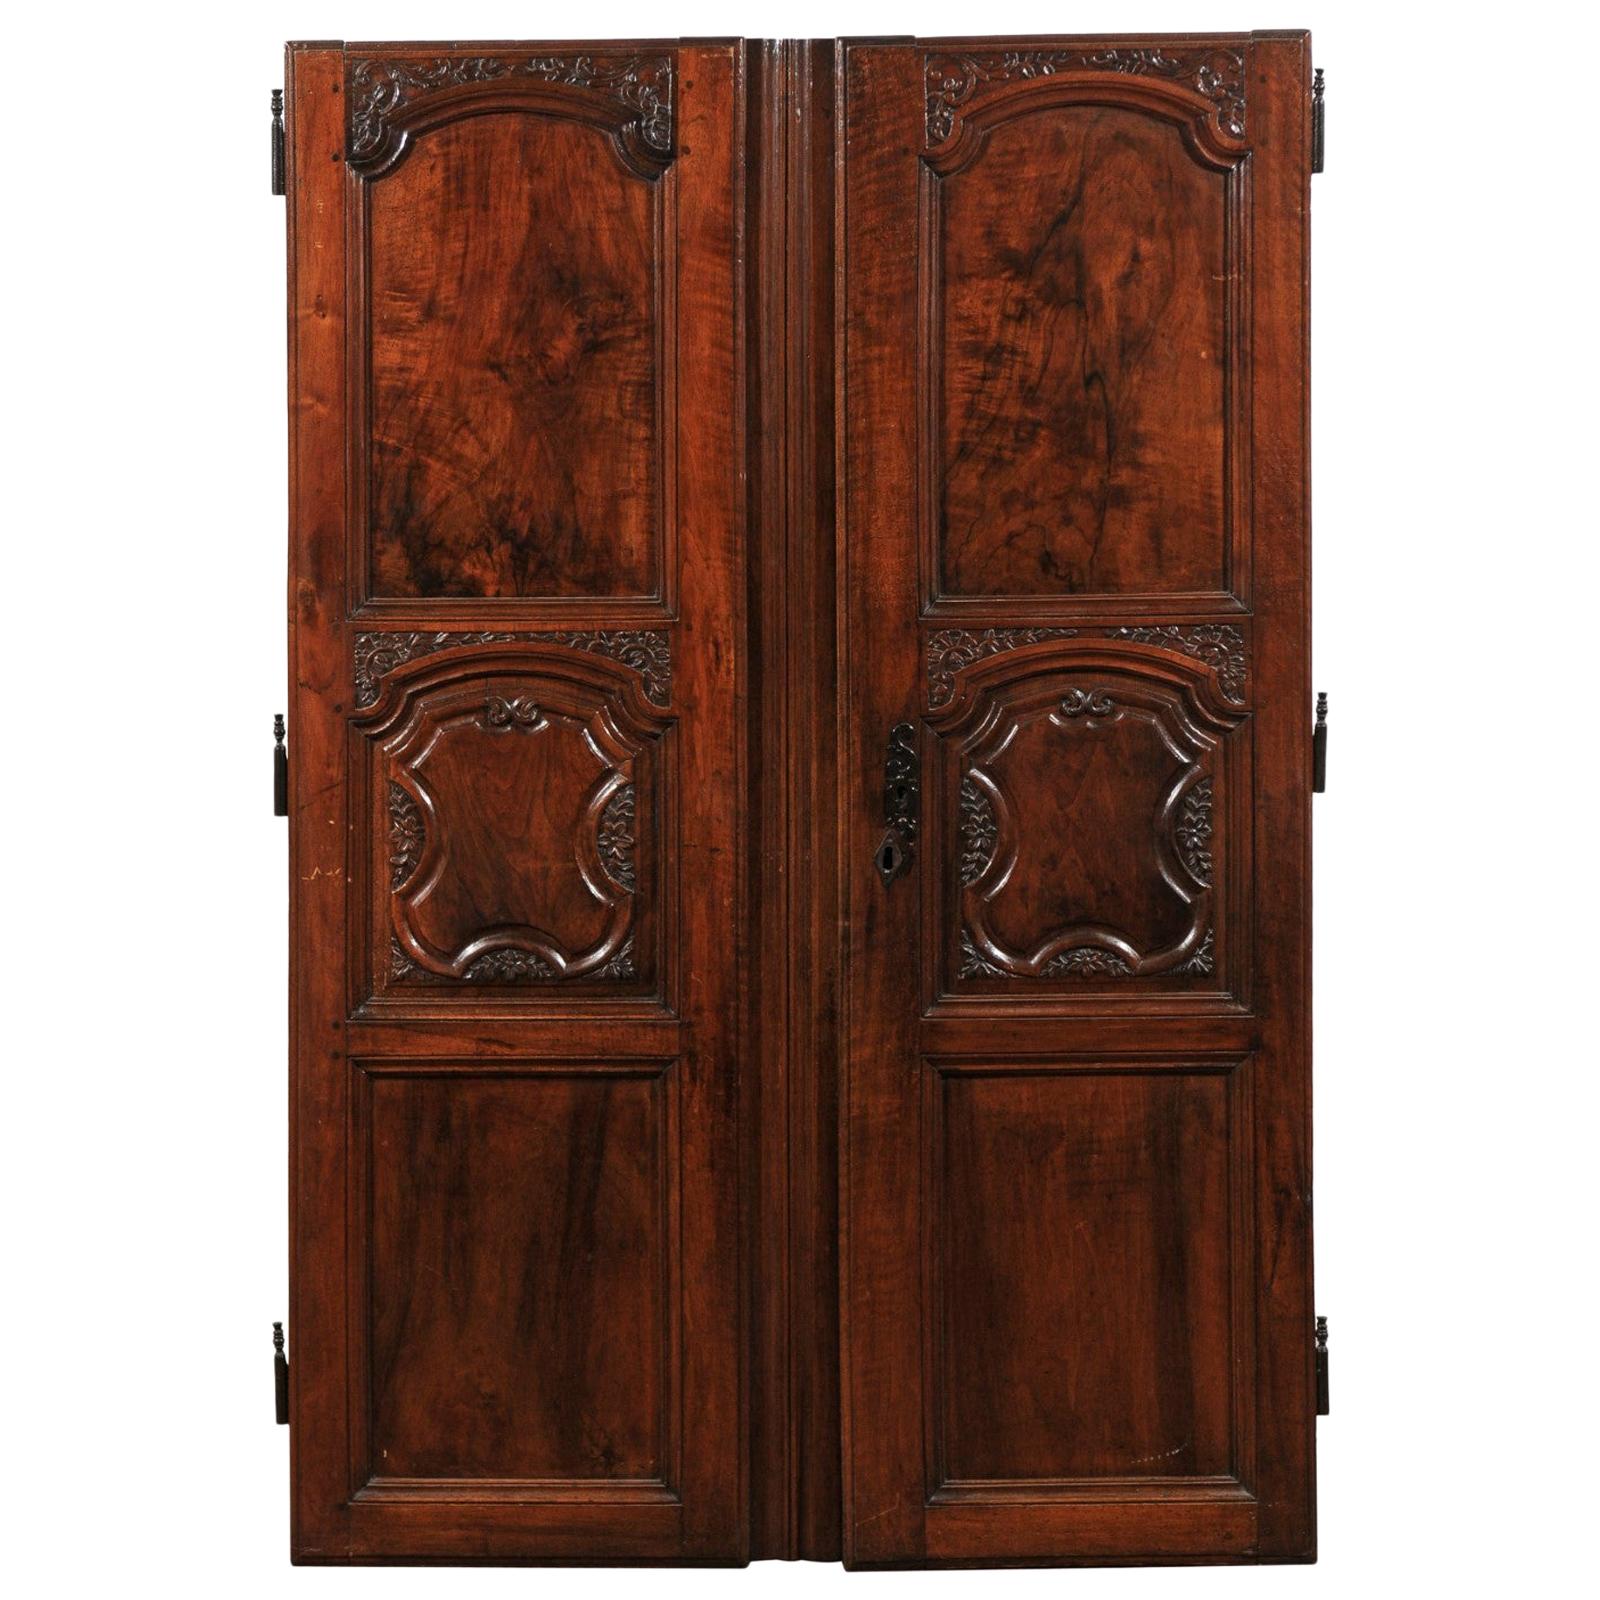 Pair of French Walnut Hand Carved Wooden Doors with Foliage Motifs, circa 1750